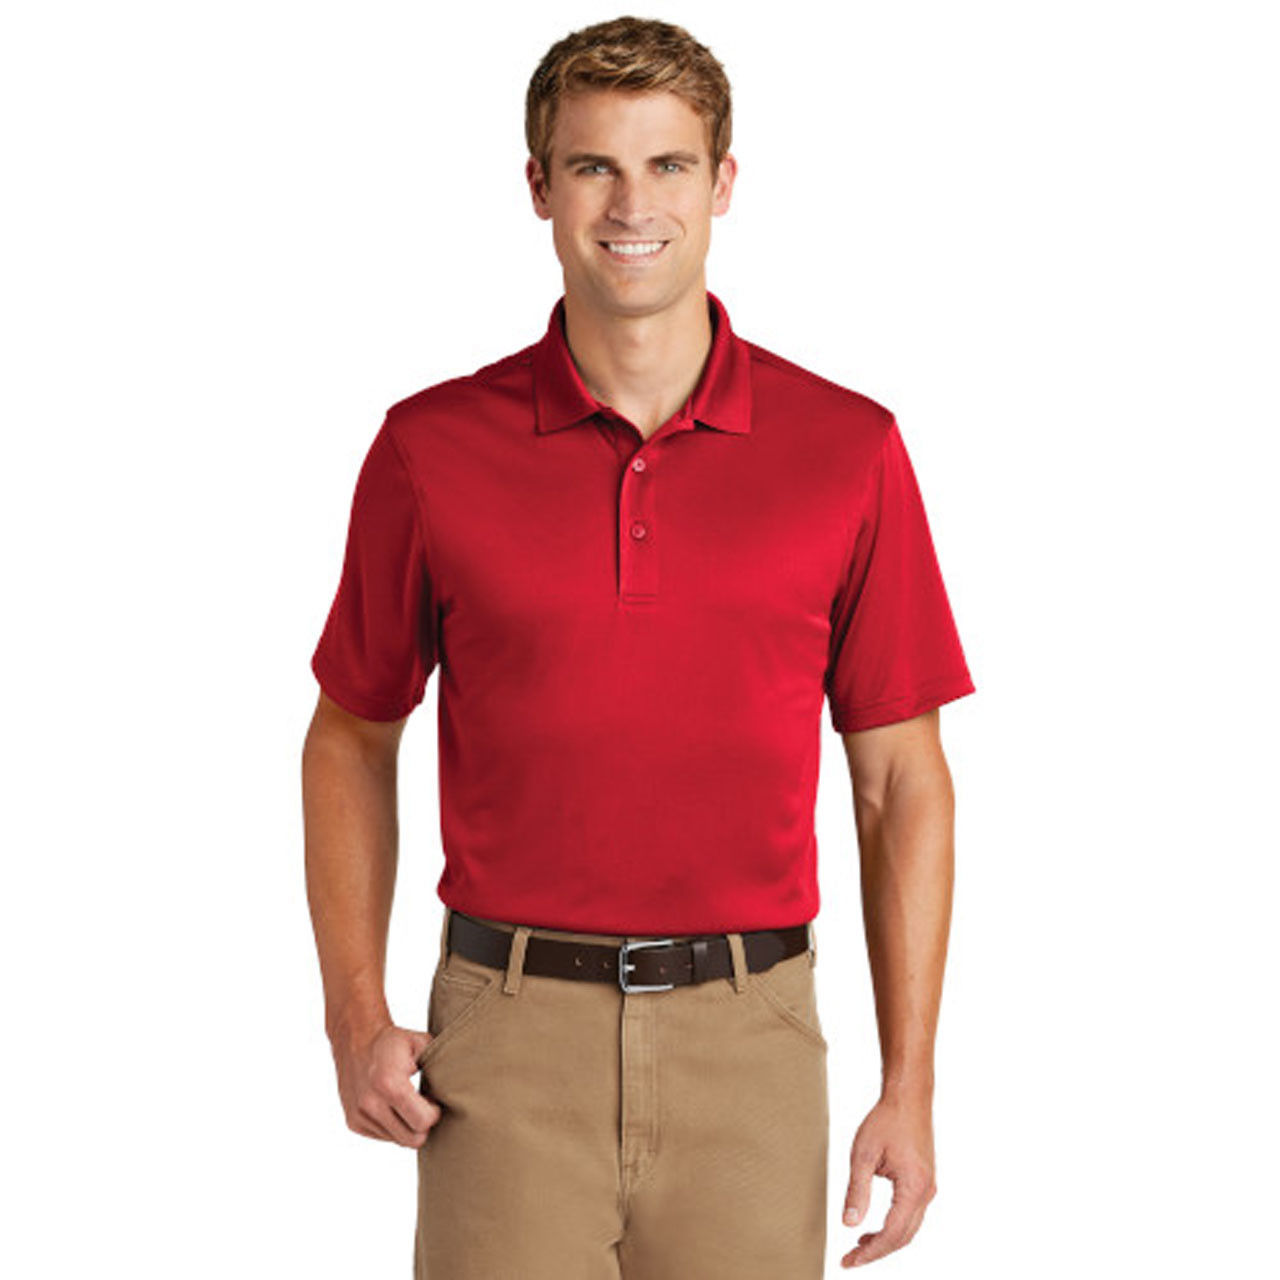 Is the men's red American wholesale polo s suitable for any occasion?